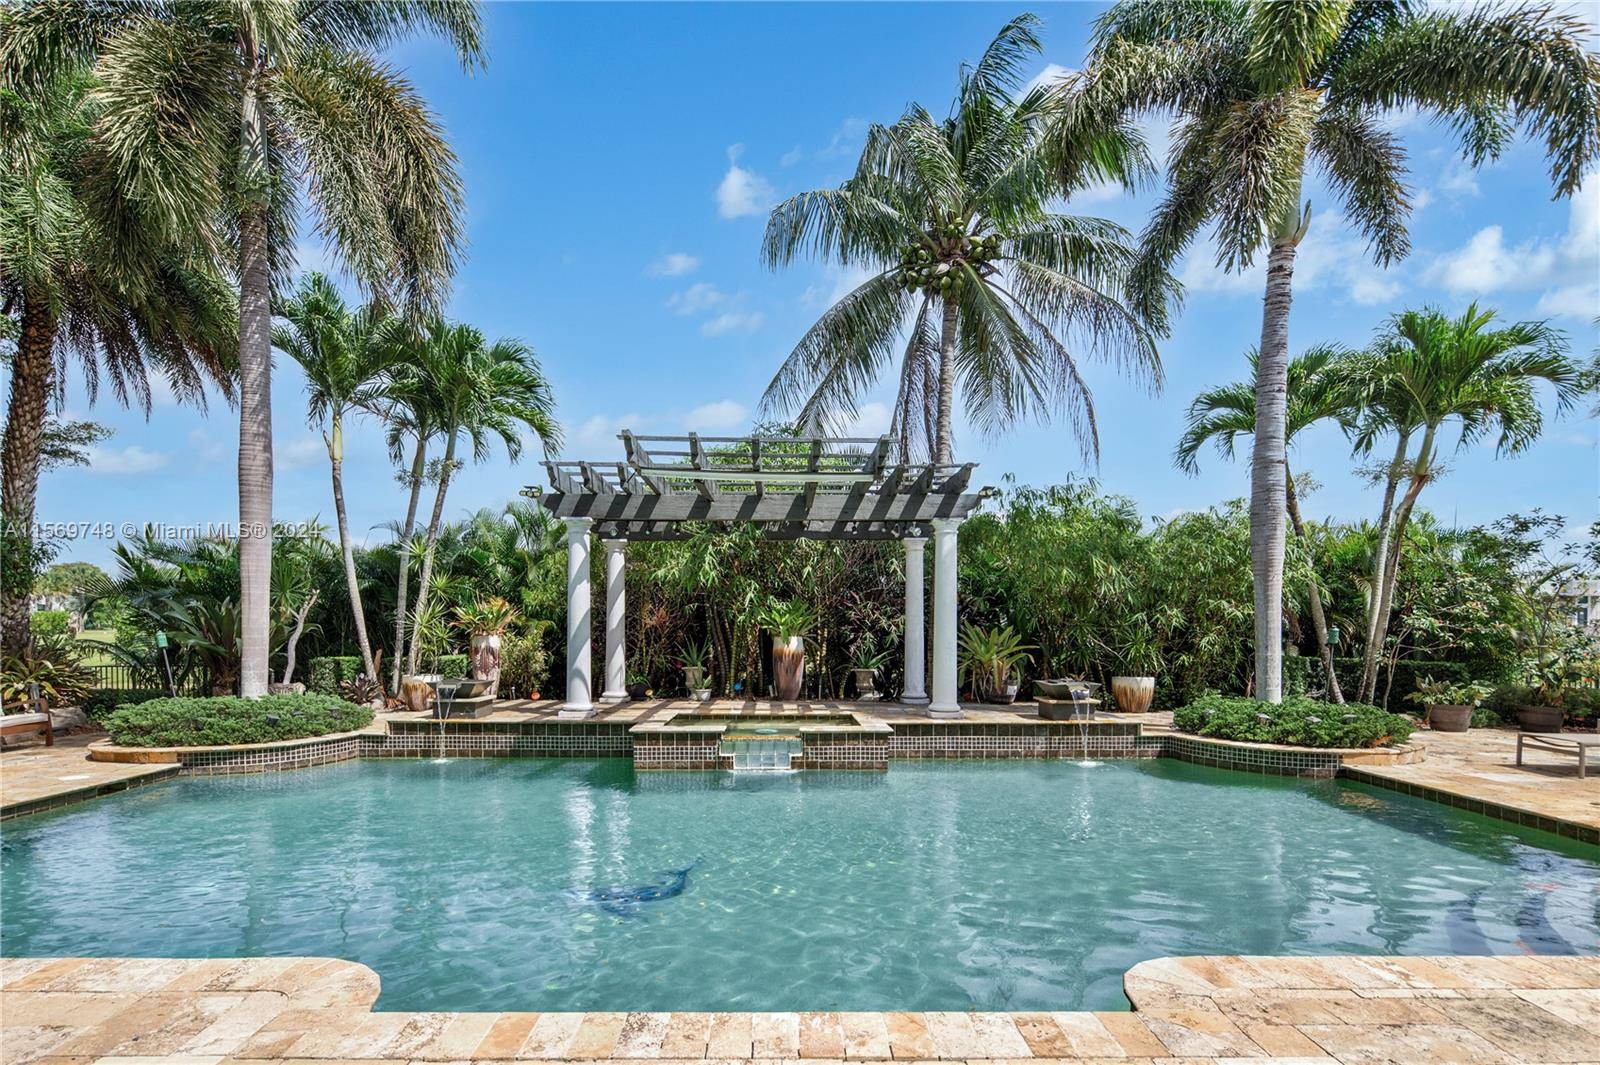 Located within Stonebrook's gated community, this majestic estate rests along the tranquil shores of a serene lake.